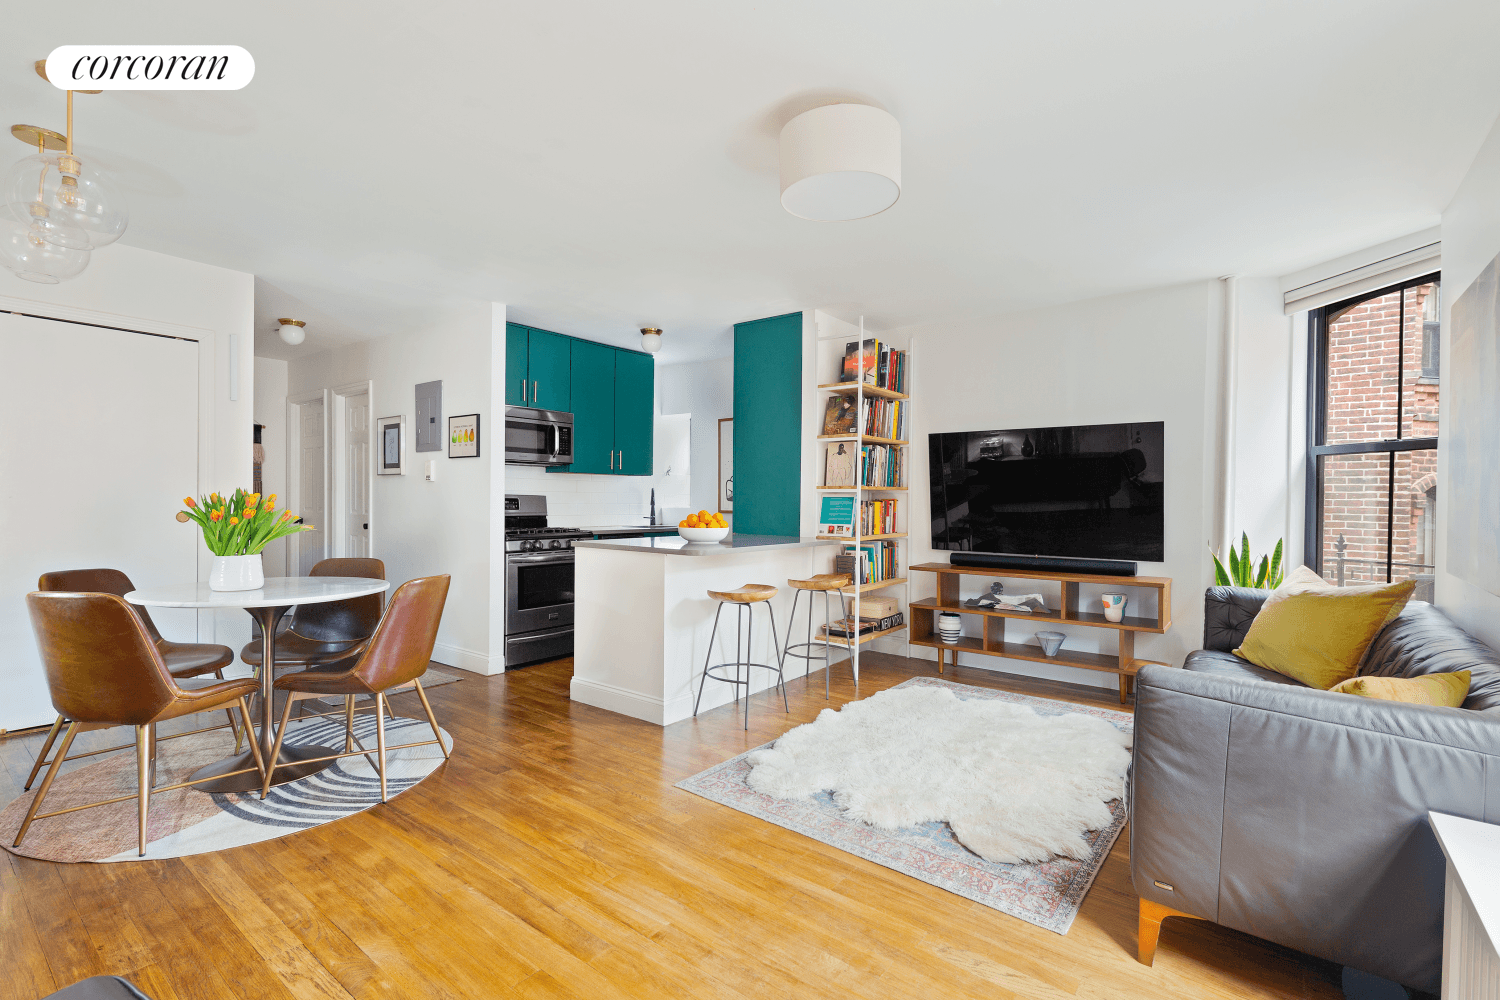 Located in the iconic Cobble Hill Towers, this two bedroom corner unit condo is filled with wonderful features.